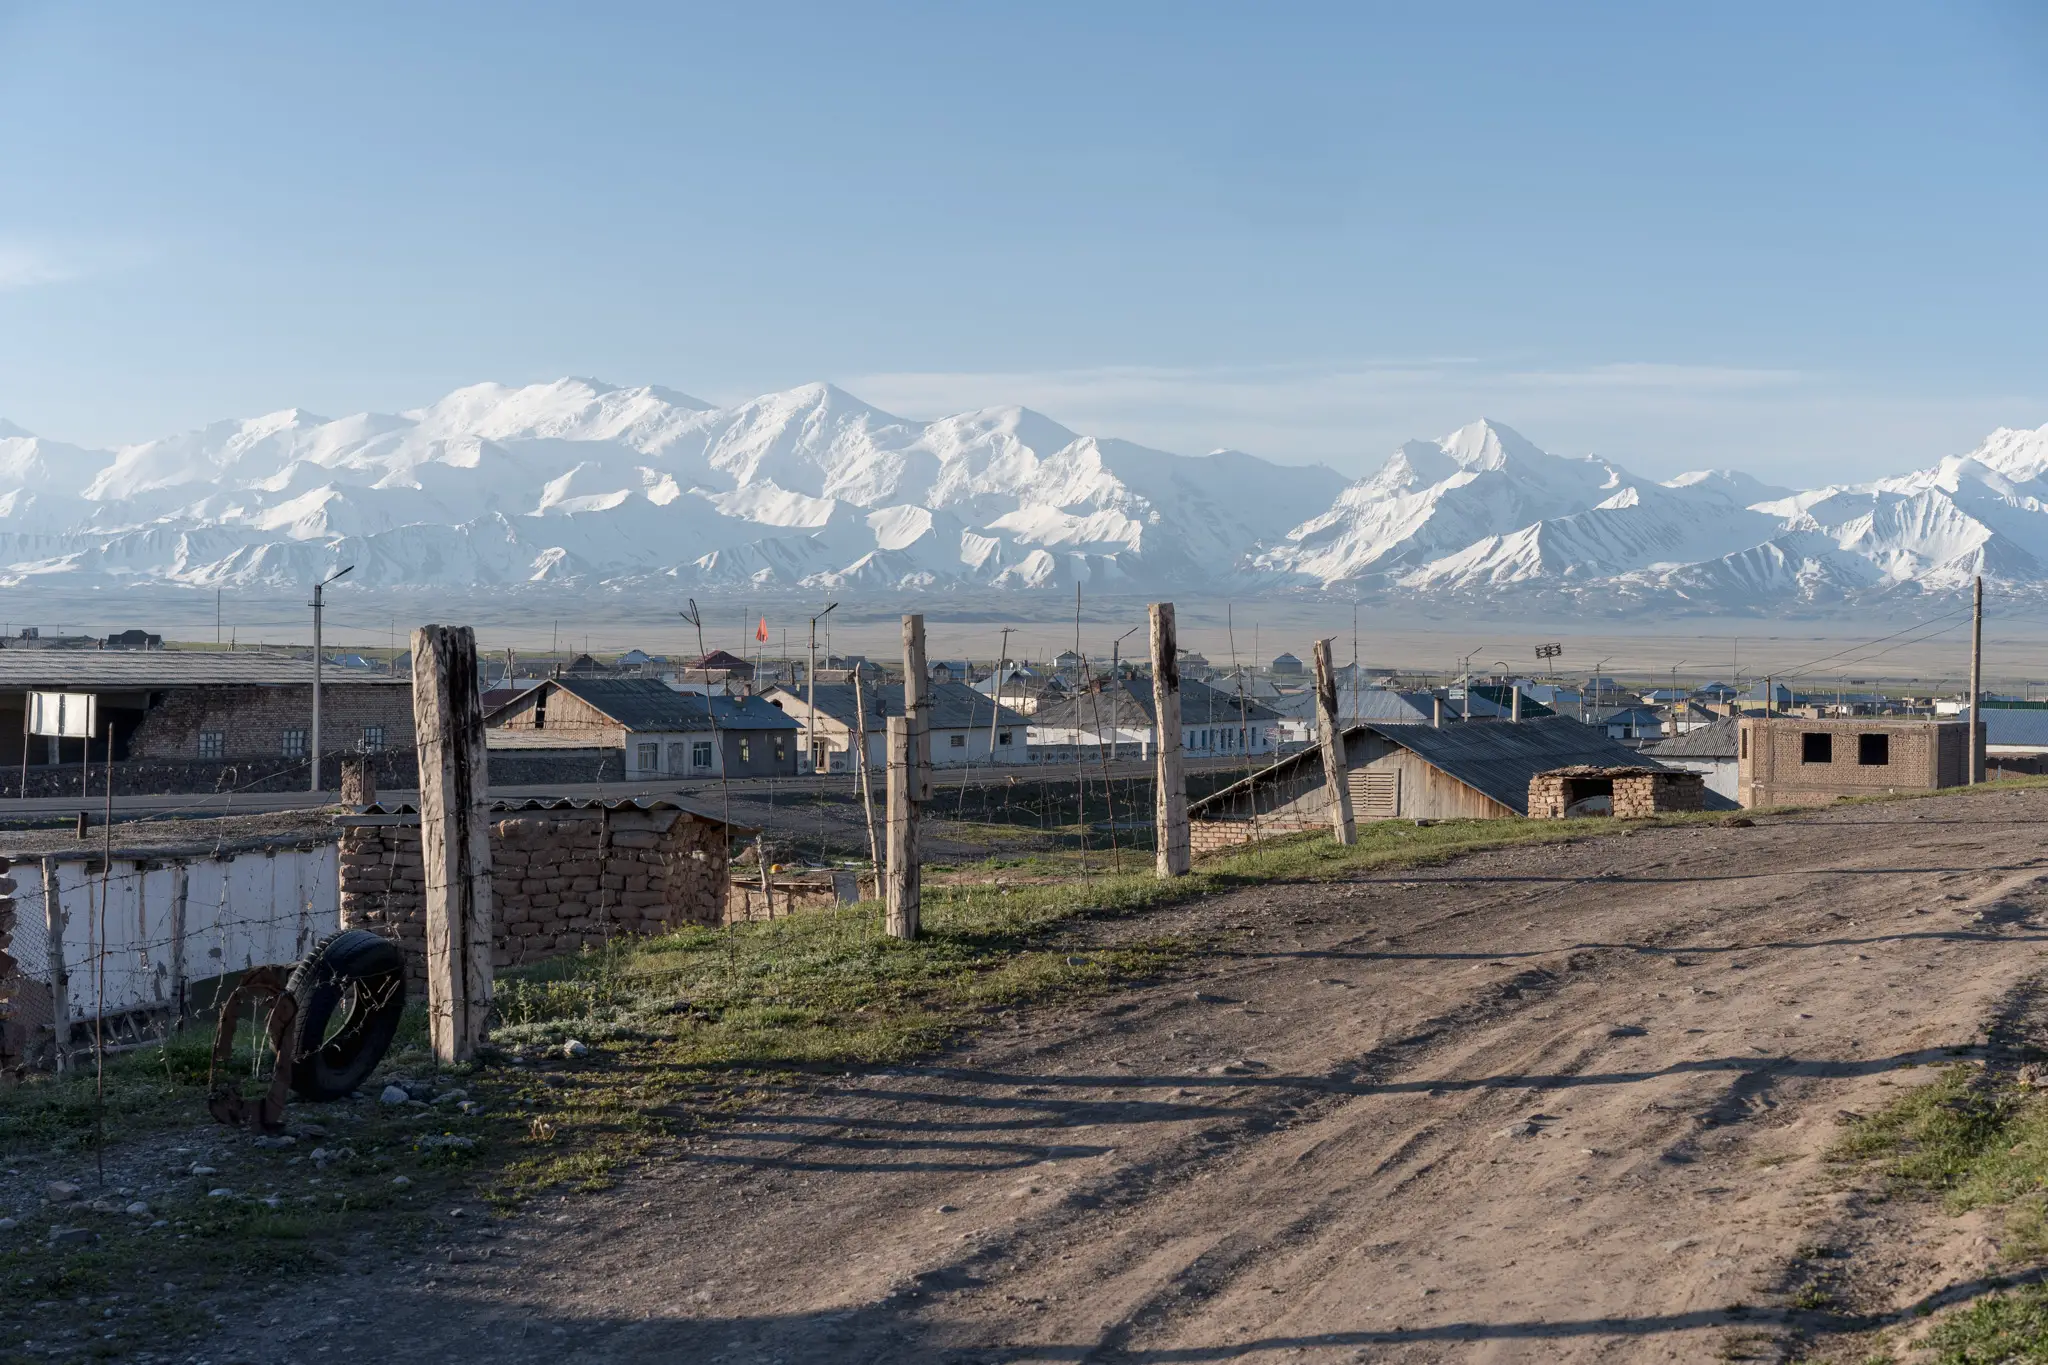 View from Sary-Tash, near the beginning of the Pamir Highway